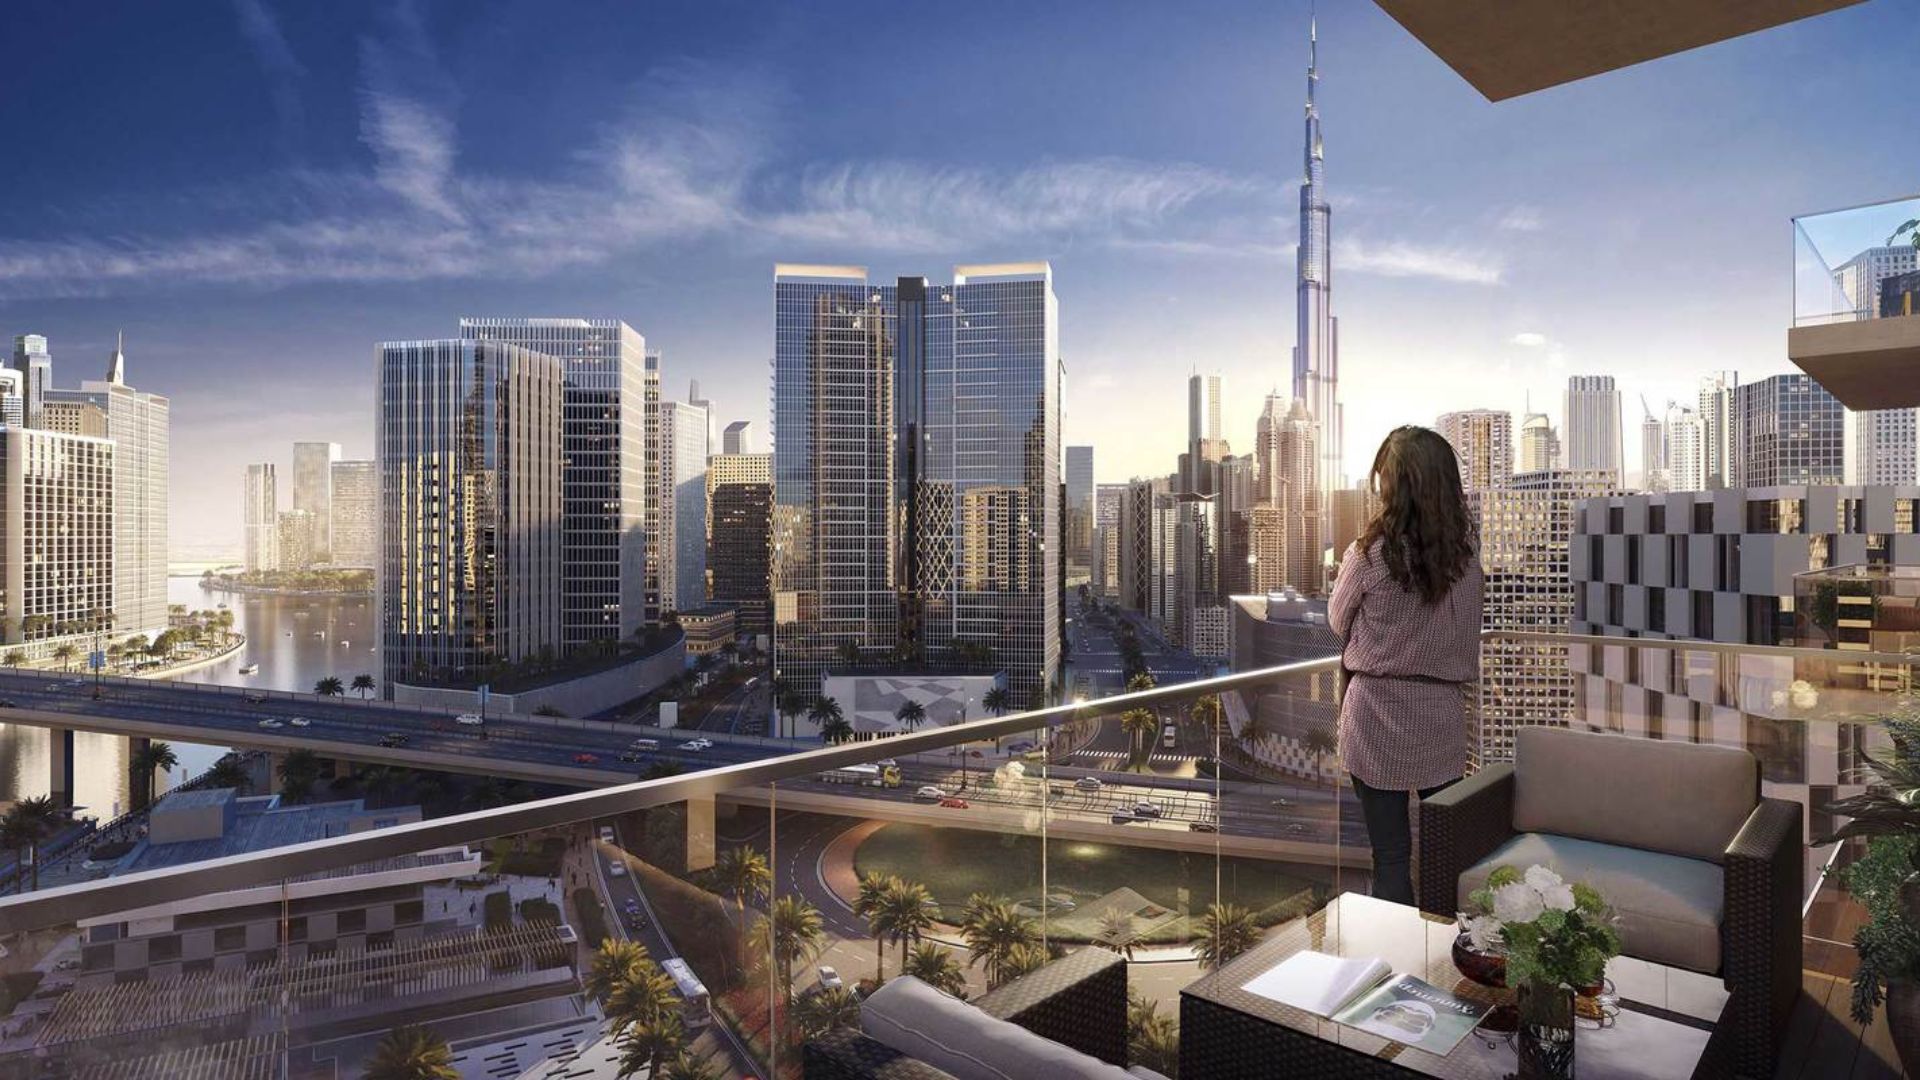 12 Things to Know Before Buying Property in Dubai